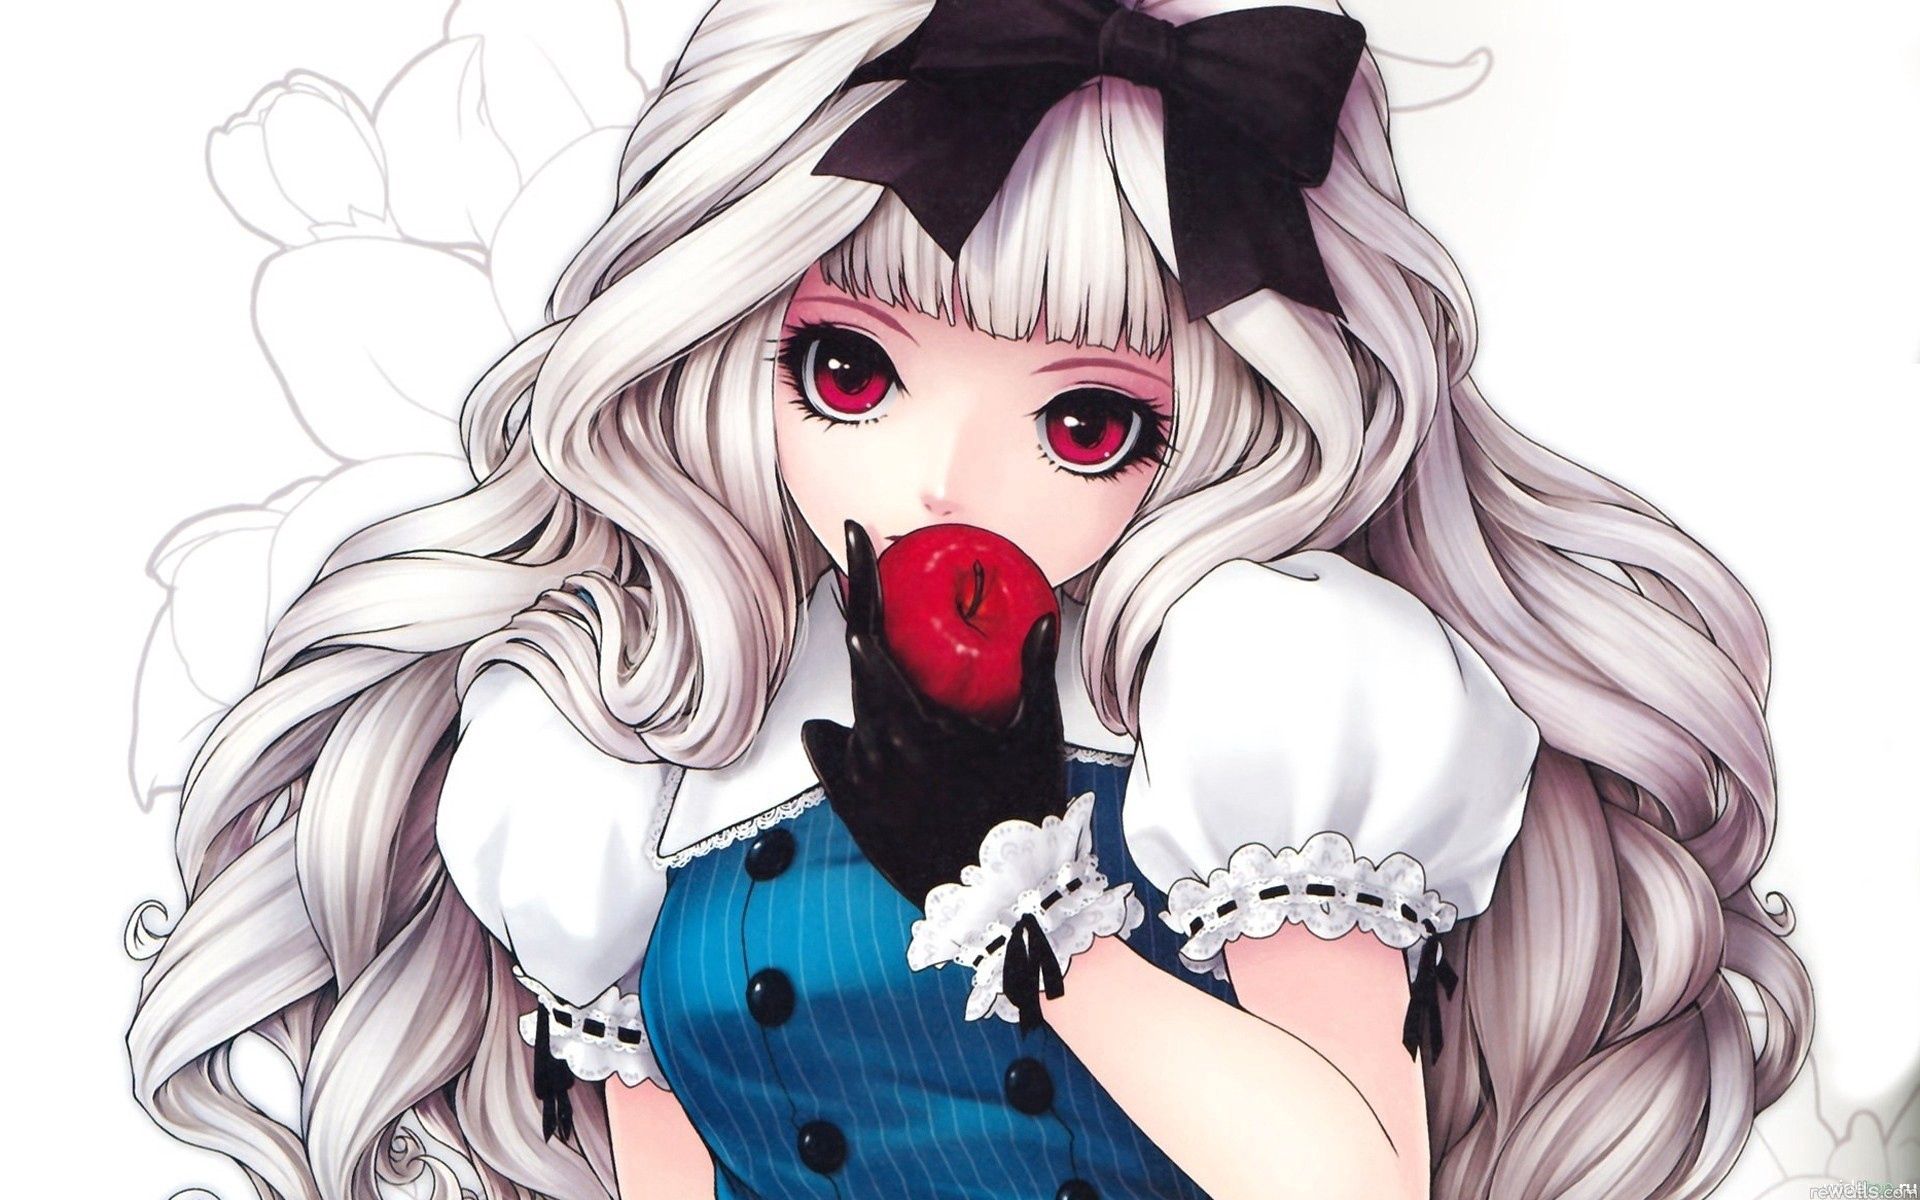 anime, apple, girl, bow, gloves, curls, yoke, coquette, lace